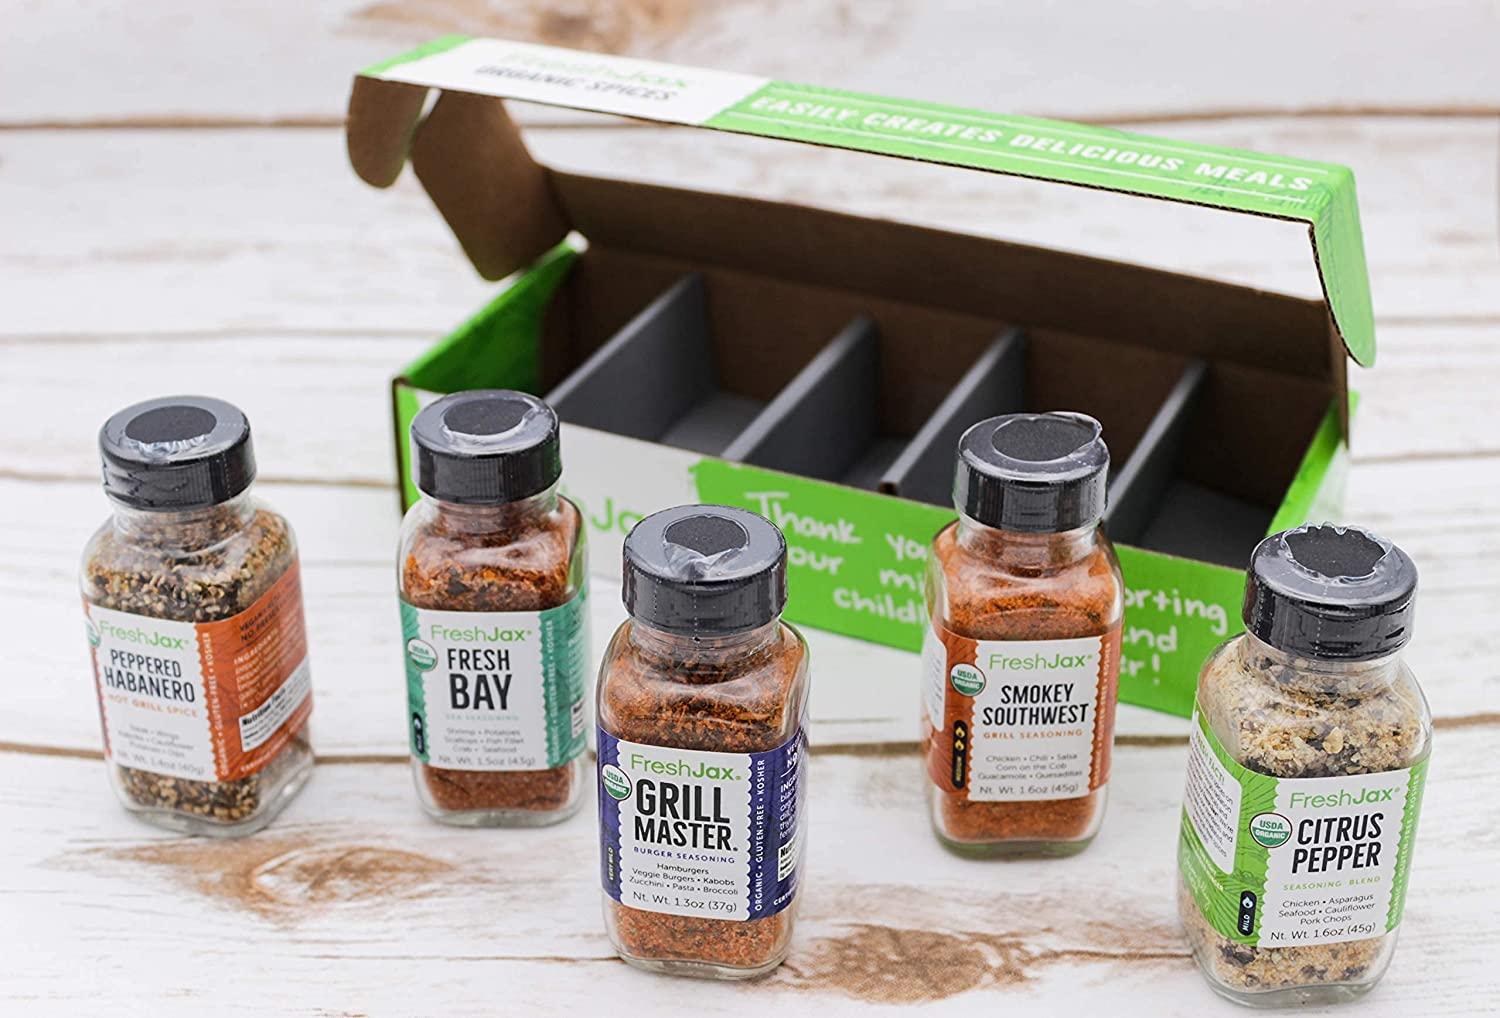 Freshjax Handcrafted Grilling Spice Gift Sets